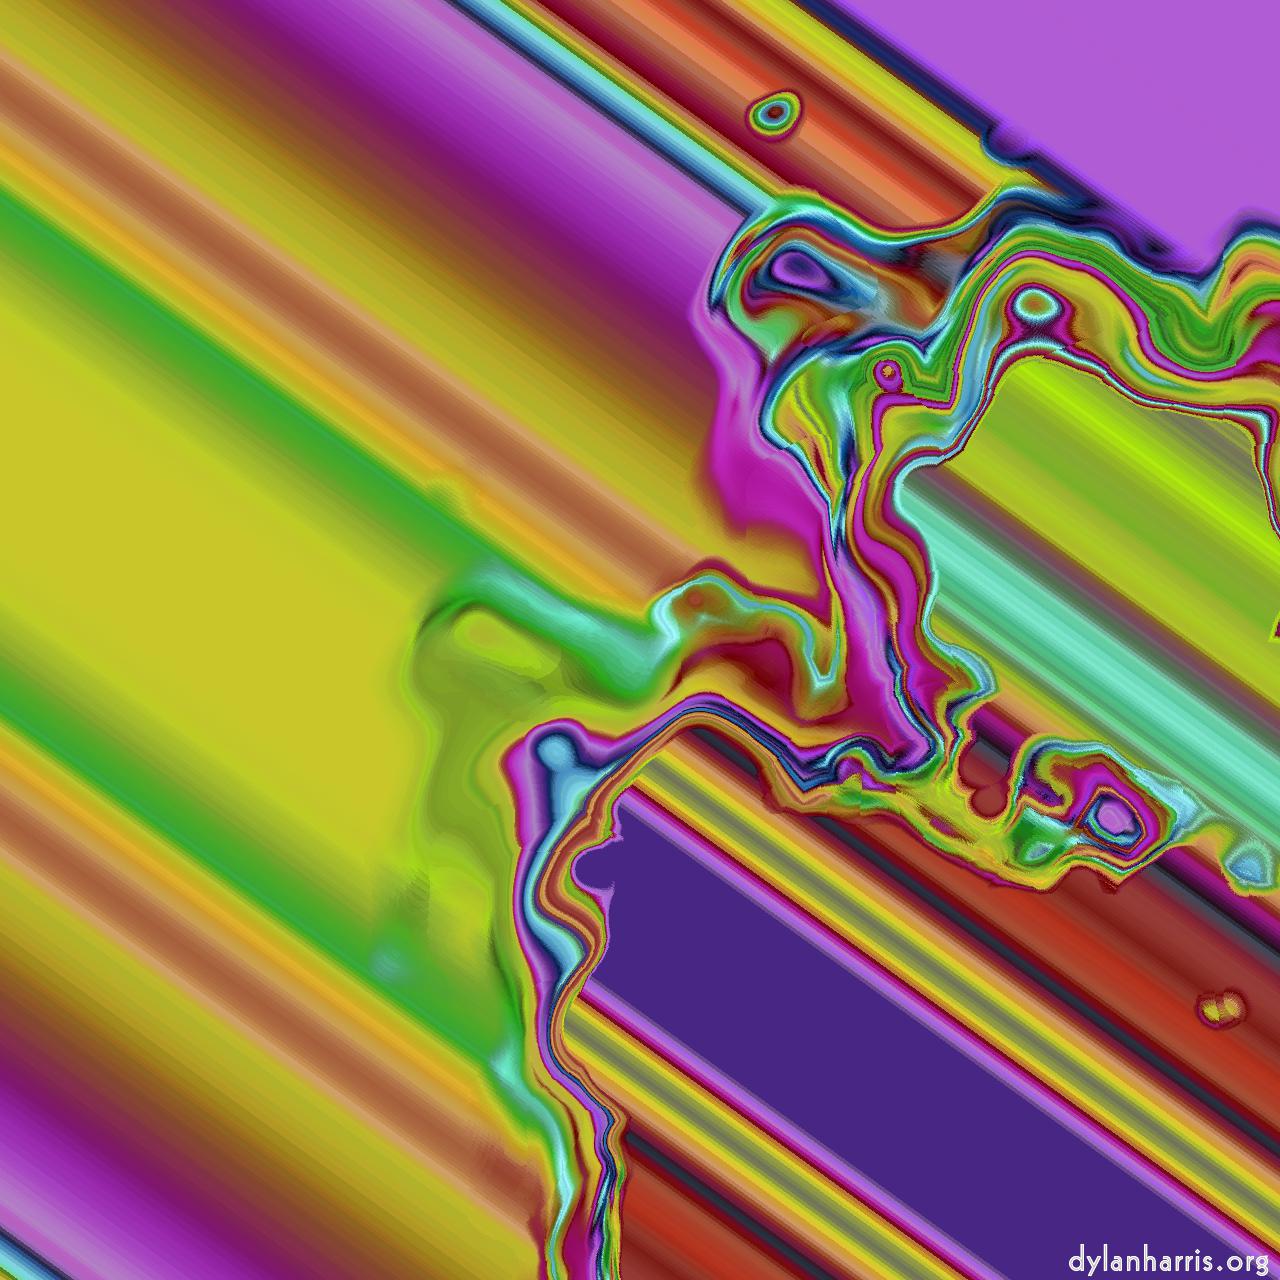 image: source process :: abstract 2